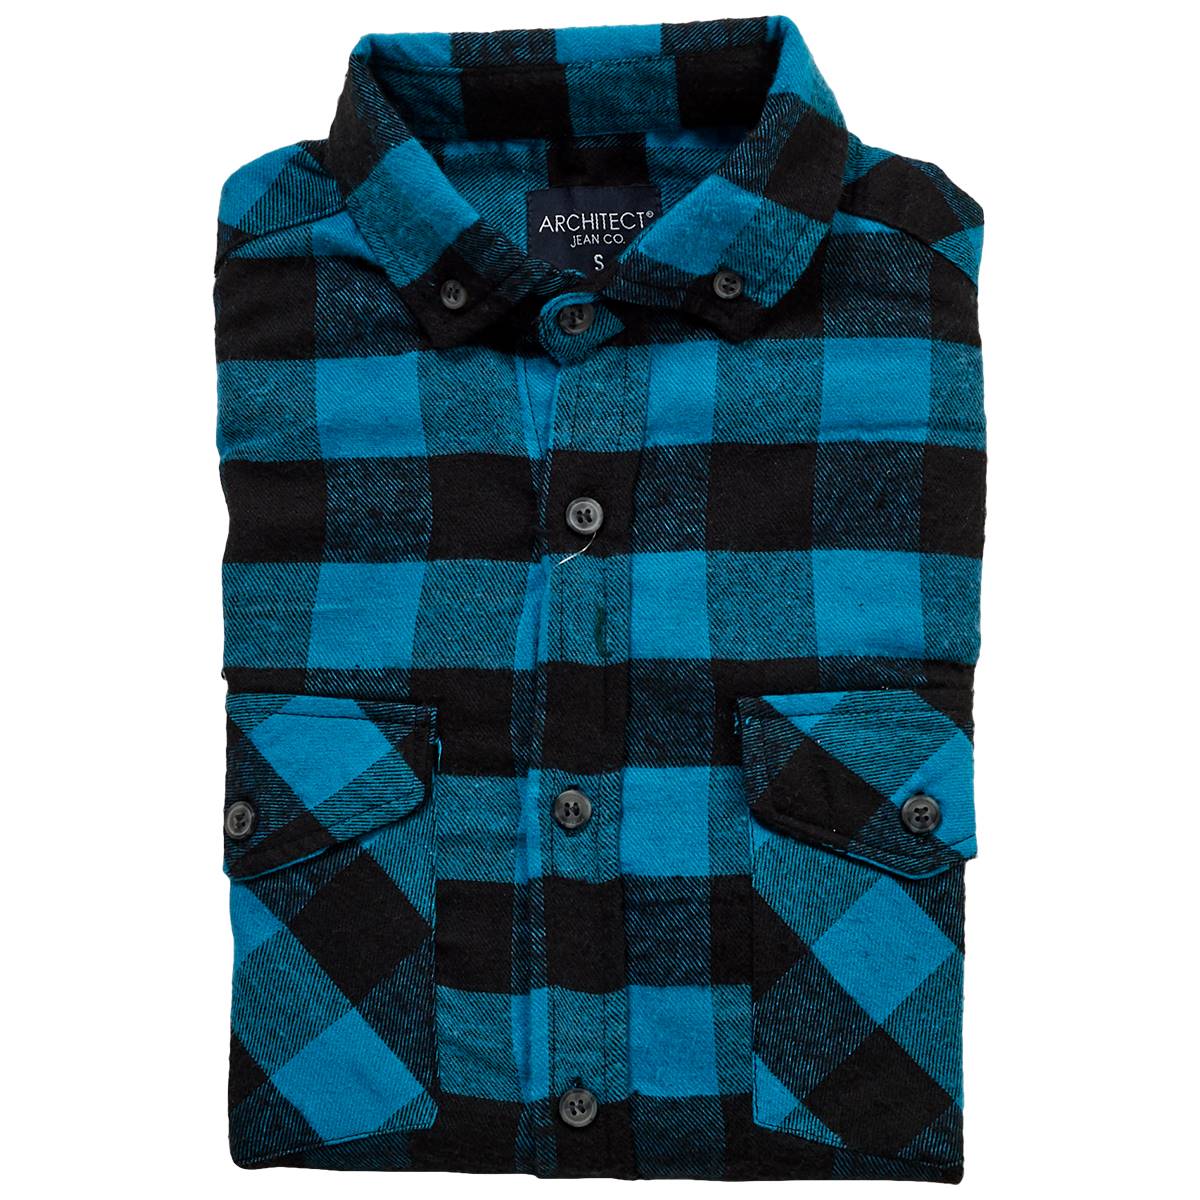 Young Mens Architect(R) Jean Co. Flannel Shirt - Teal & Black